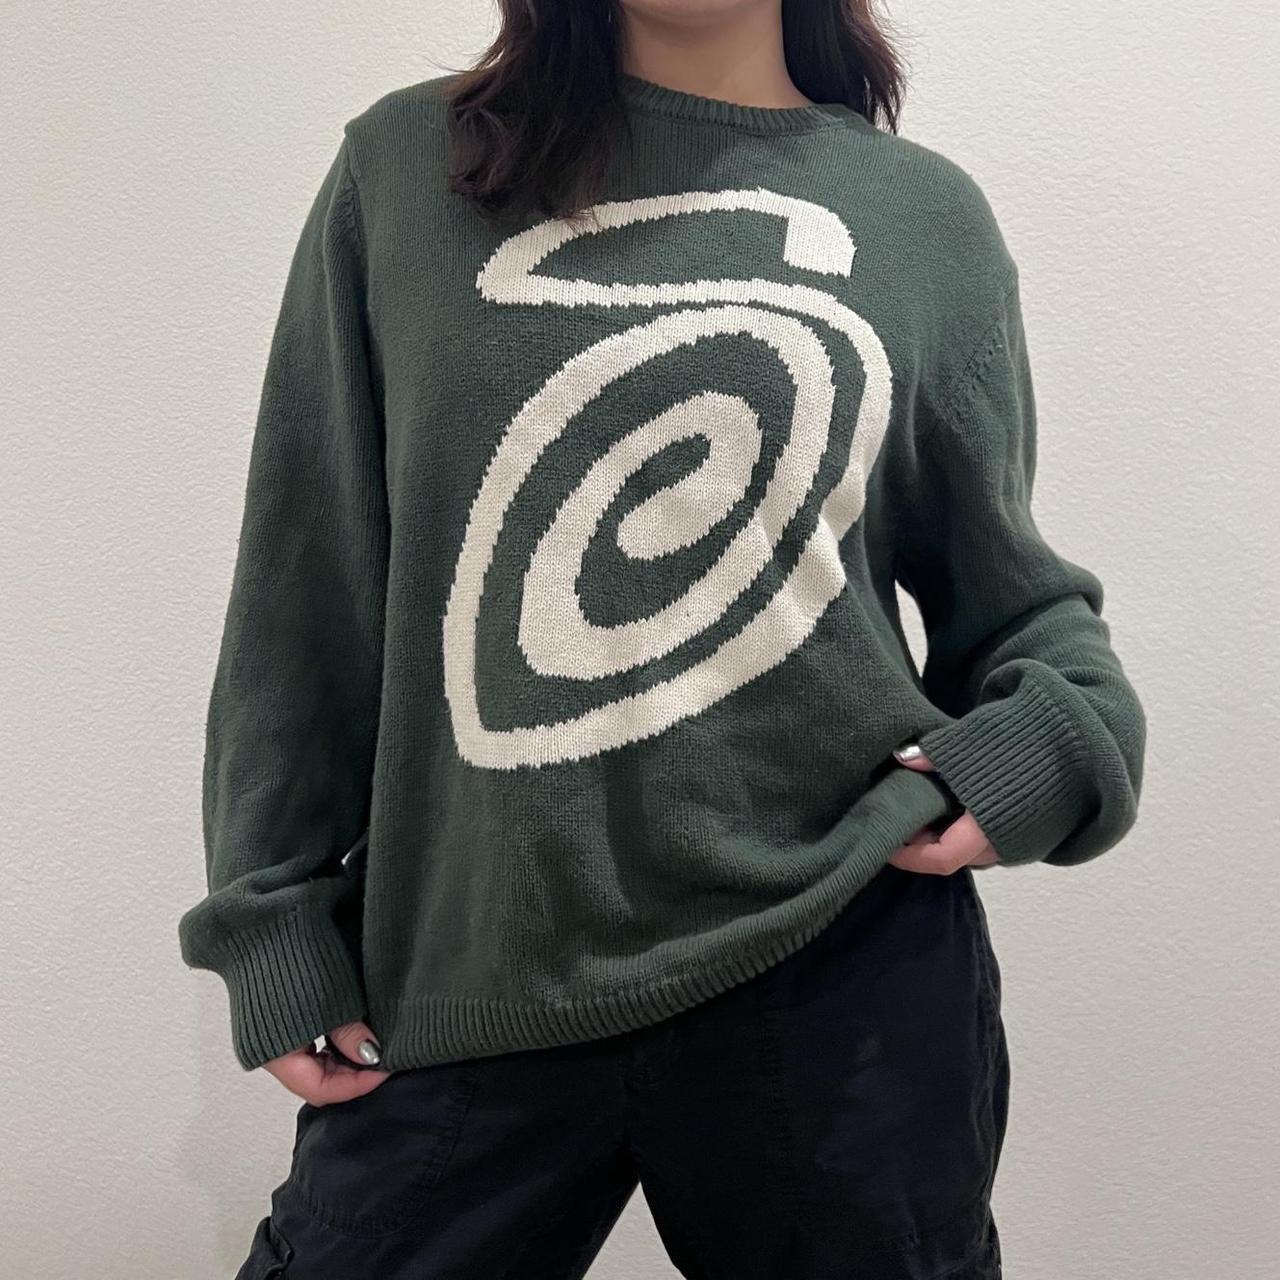 Green stussy knit “Stussy” curly S knitted - Depop